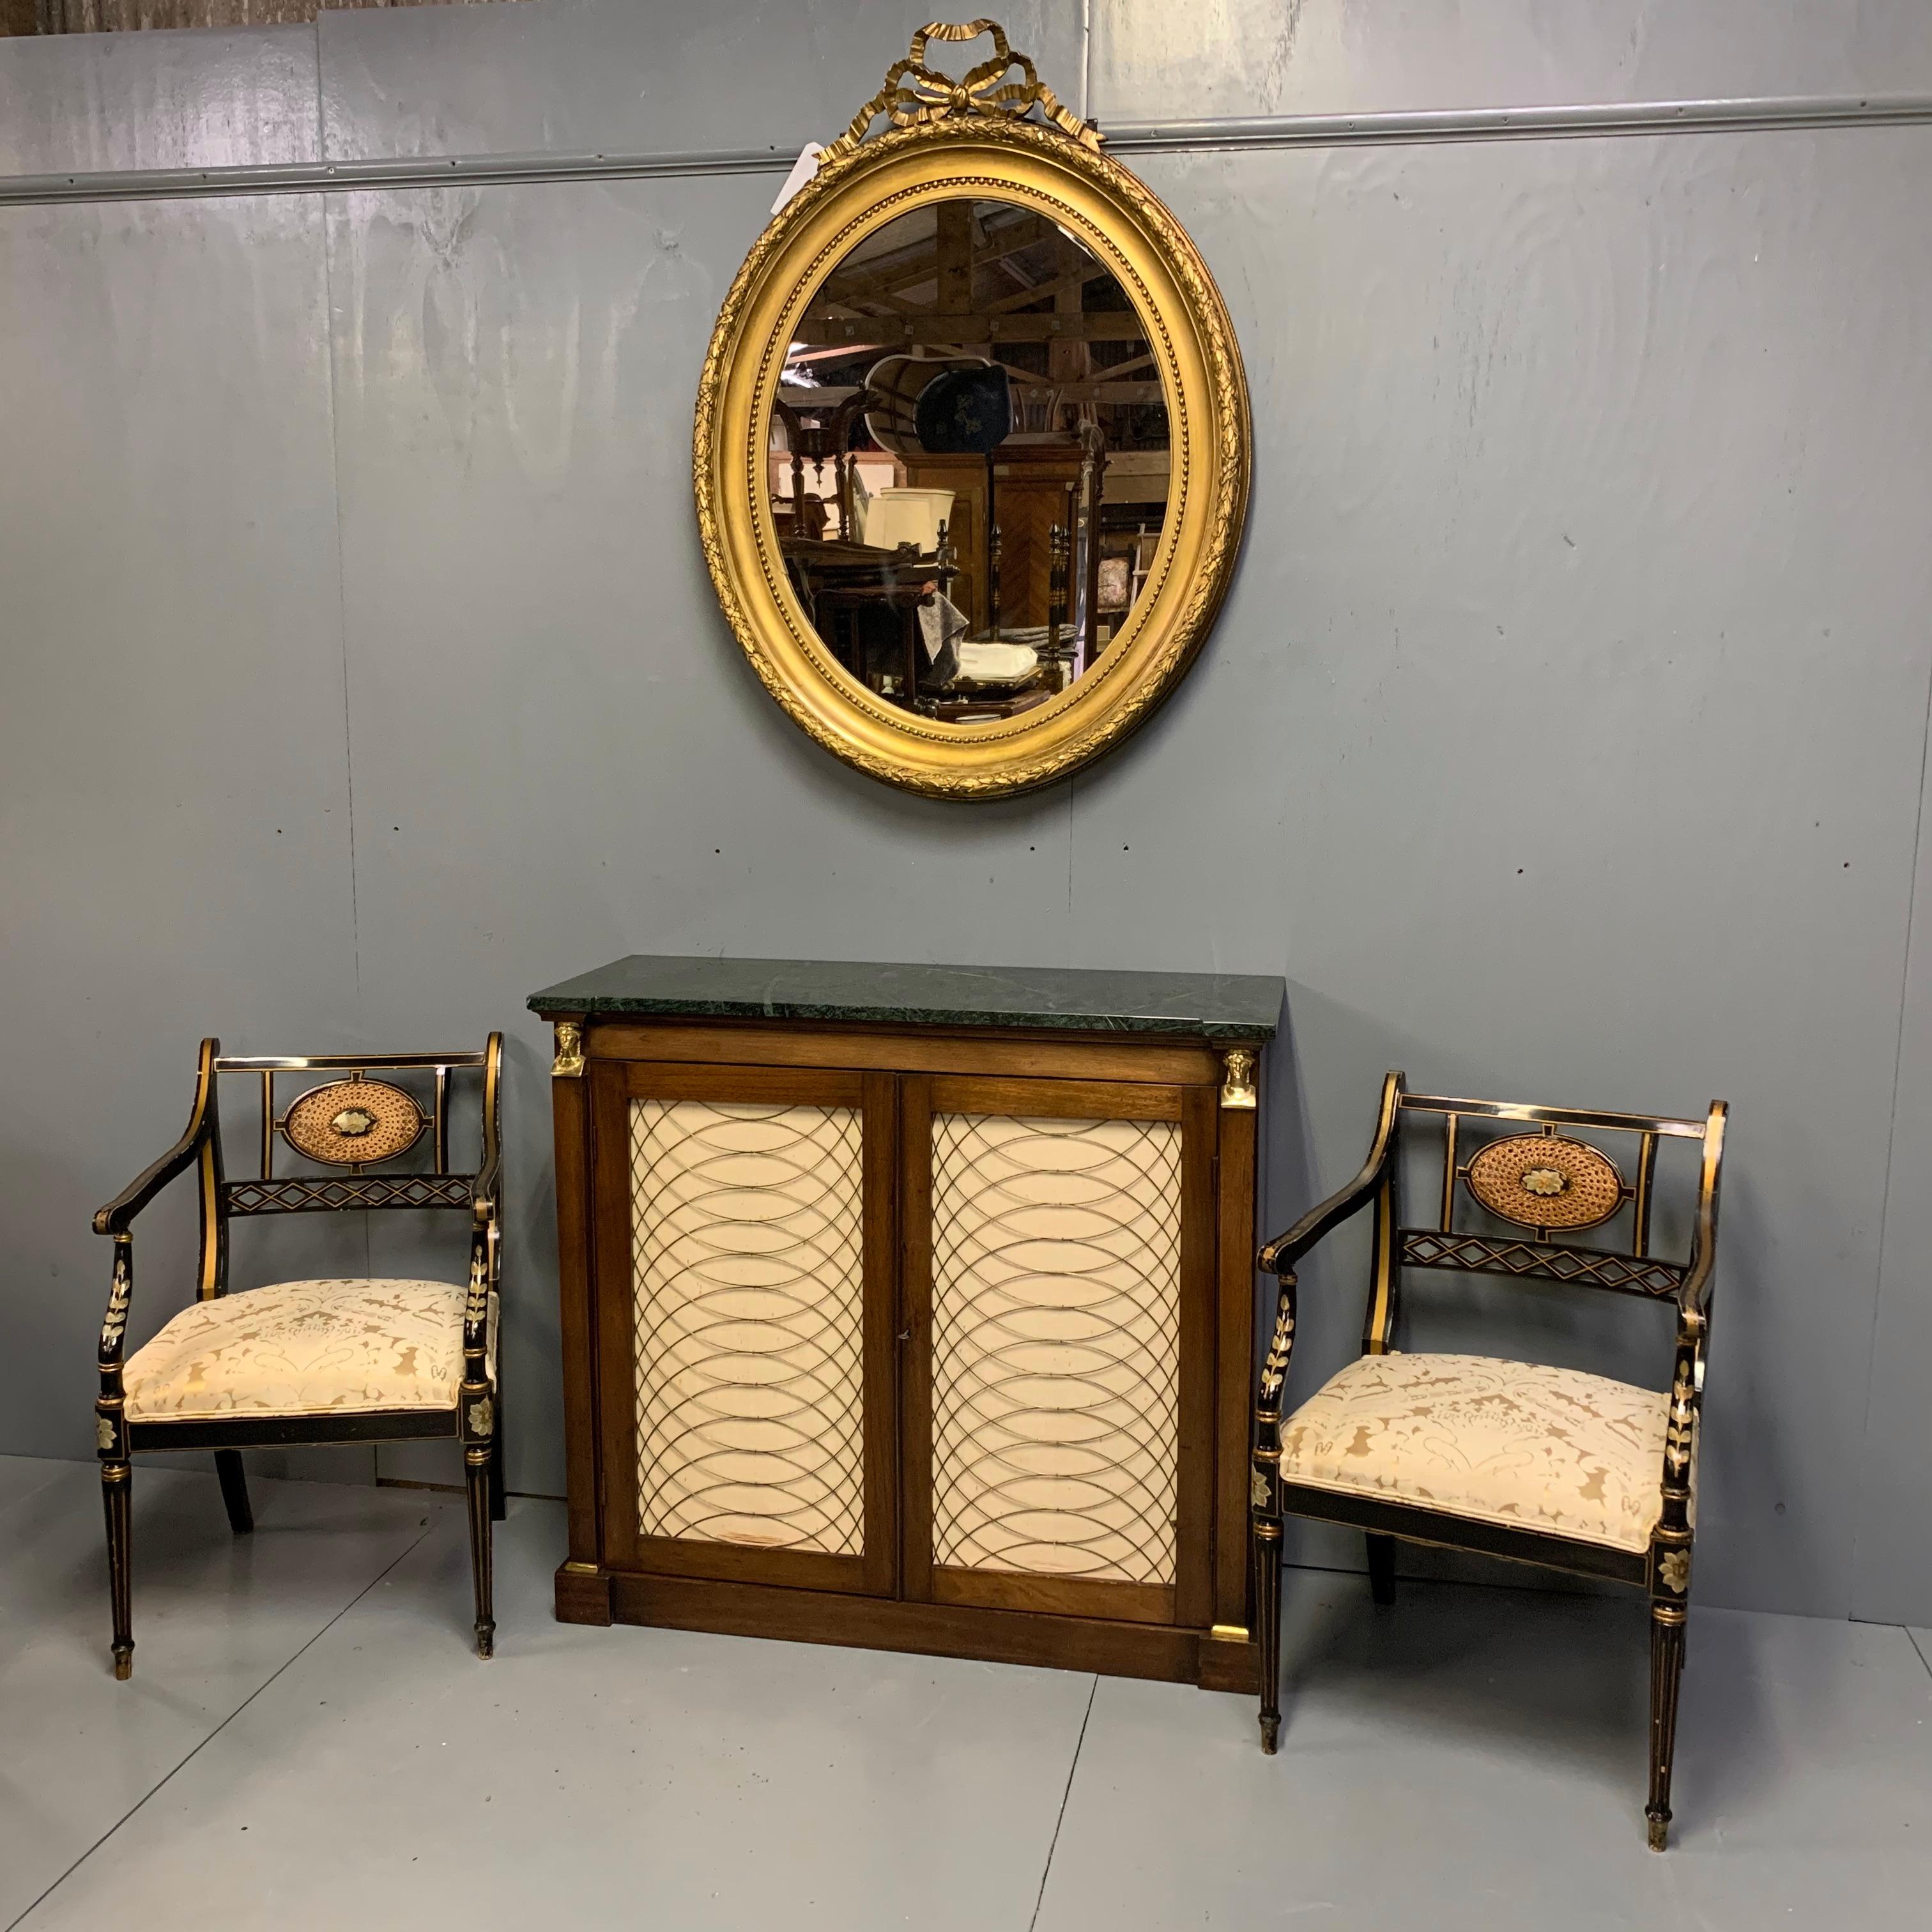 Beautiful pair of fine quality black lacquered and decorated elbow chairs with oval cane inserts and a gilt highlighting, circa 1900
Very nice proportions to these chairs and they are very decorative, although are practical too if you were to use